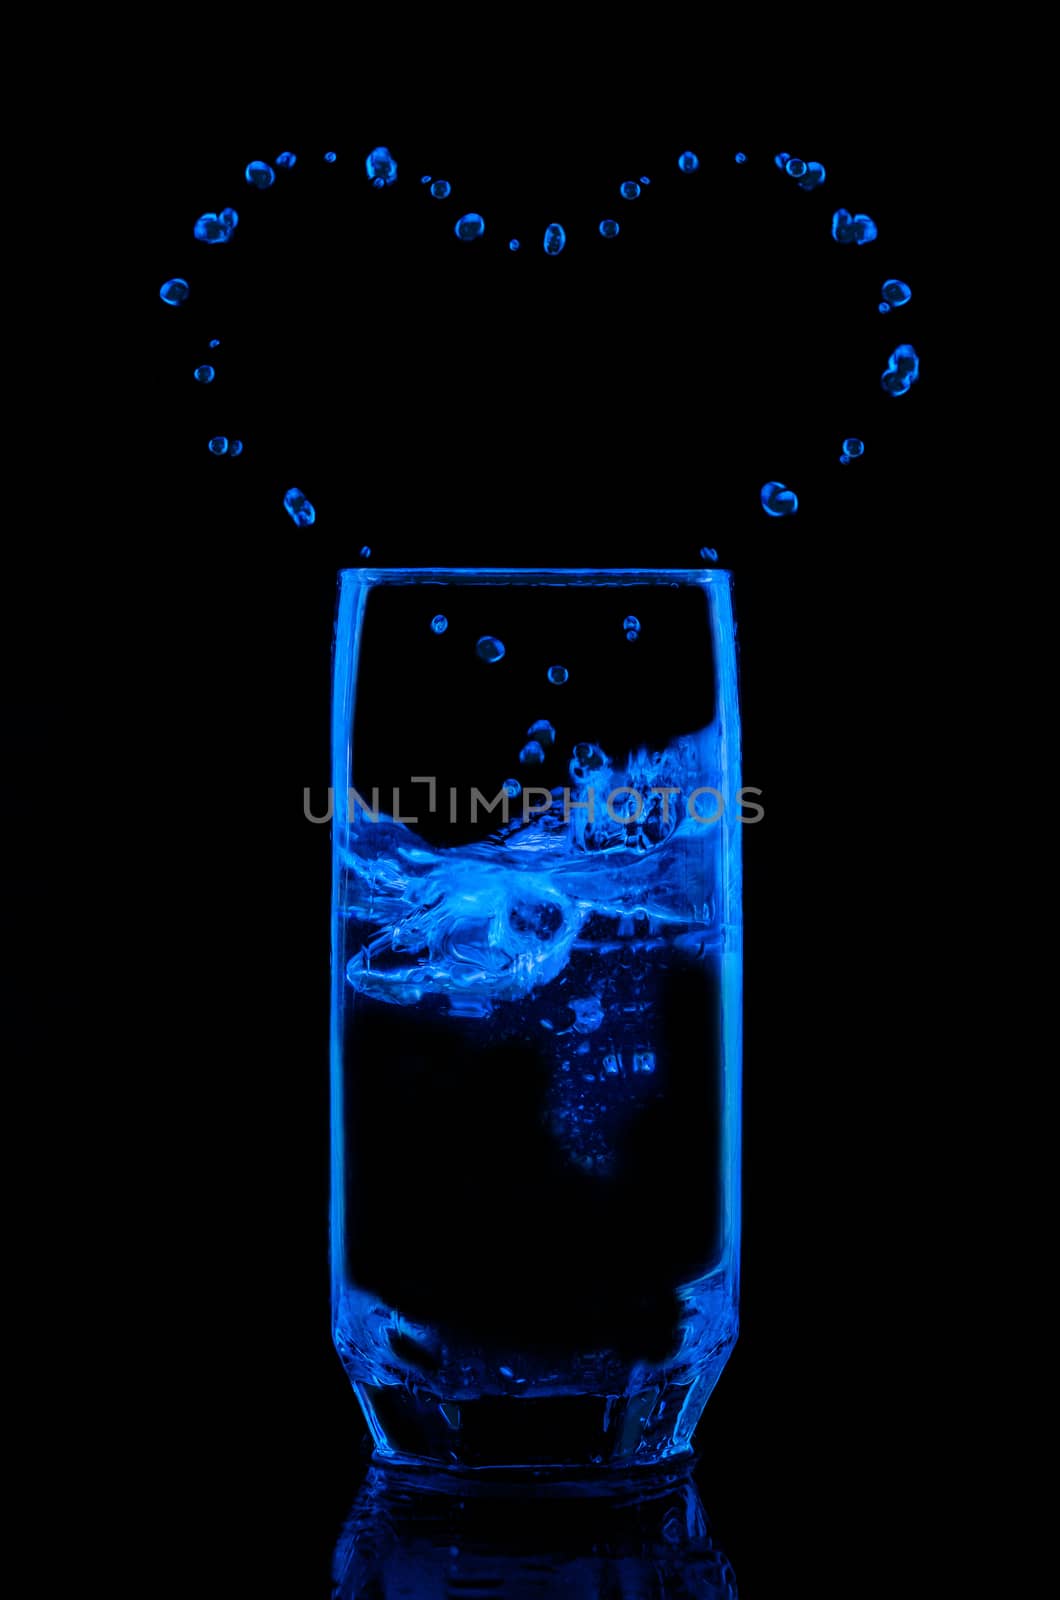 Water in a glass on black background by Gaina